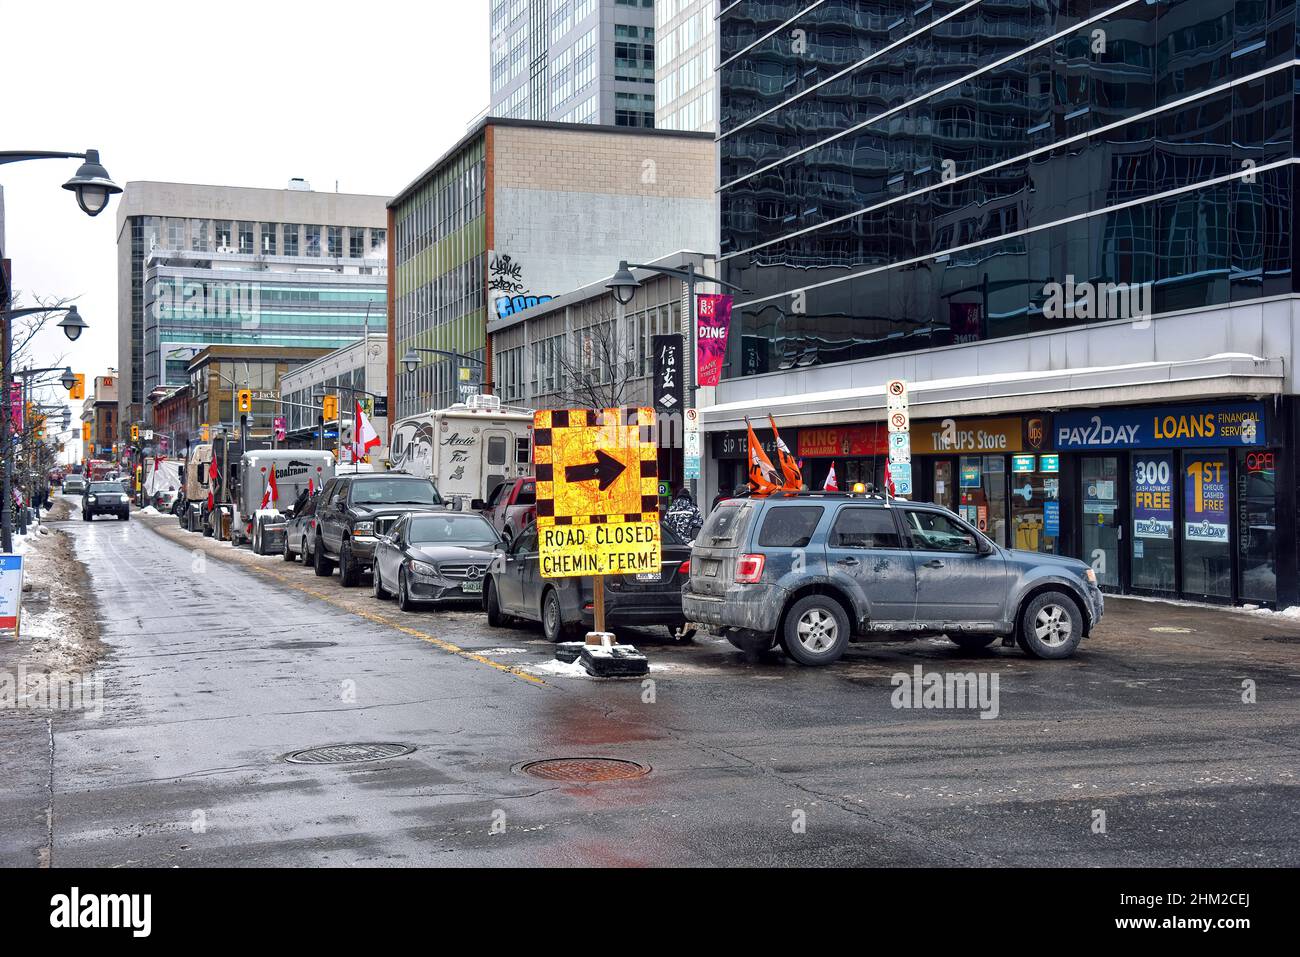 Ottawa, Canada – February 6, 2022: Bank Street in downtown Ottawa blocked with many trucks and vehicle as part of the trucker convoy protest. The protest has shutdown much of downtown Ottawa and caused a lot of grief for local residents and business. Stock Photo